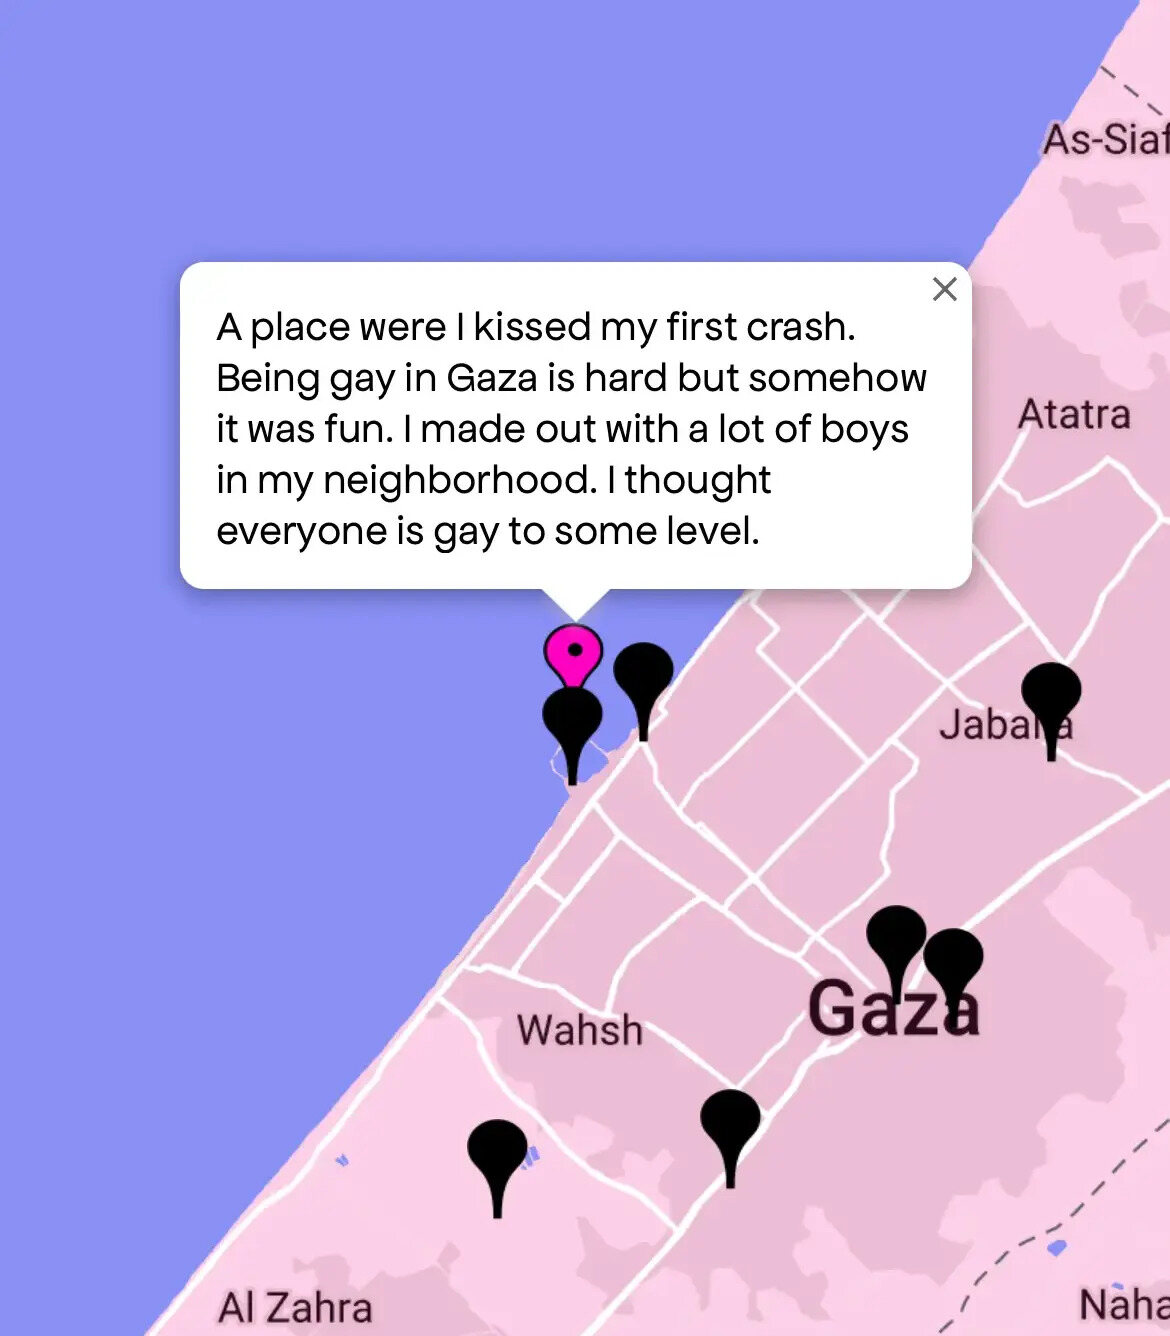 “A place [where] I kissed my first [crush]. Being gay in Gaza is hard but somehow it was fun. I made out with a lot of boys in my neighborhood. I thought everyone is gay to some level.”